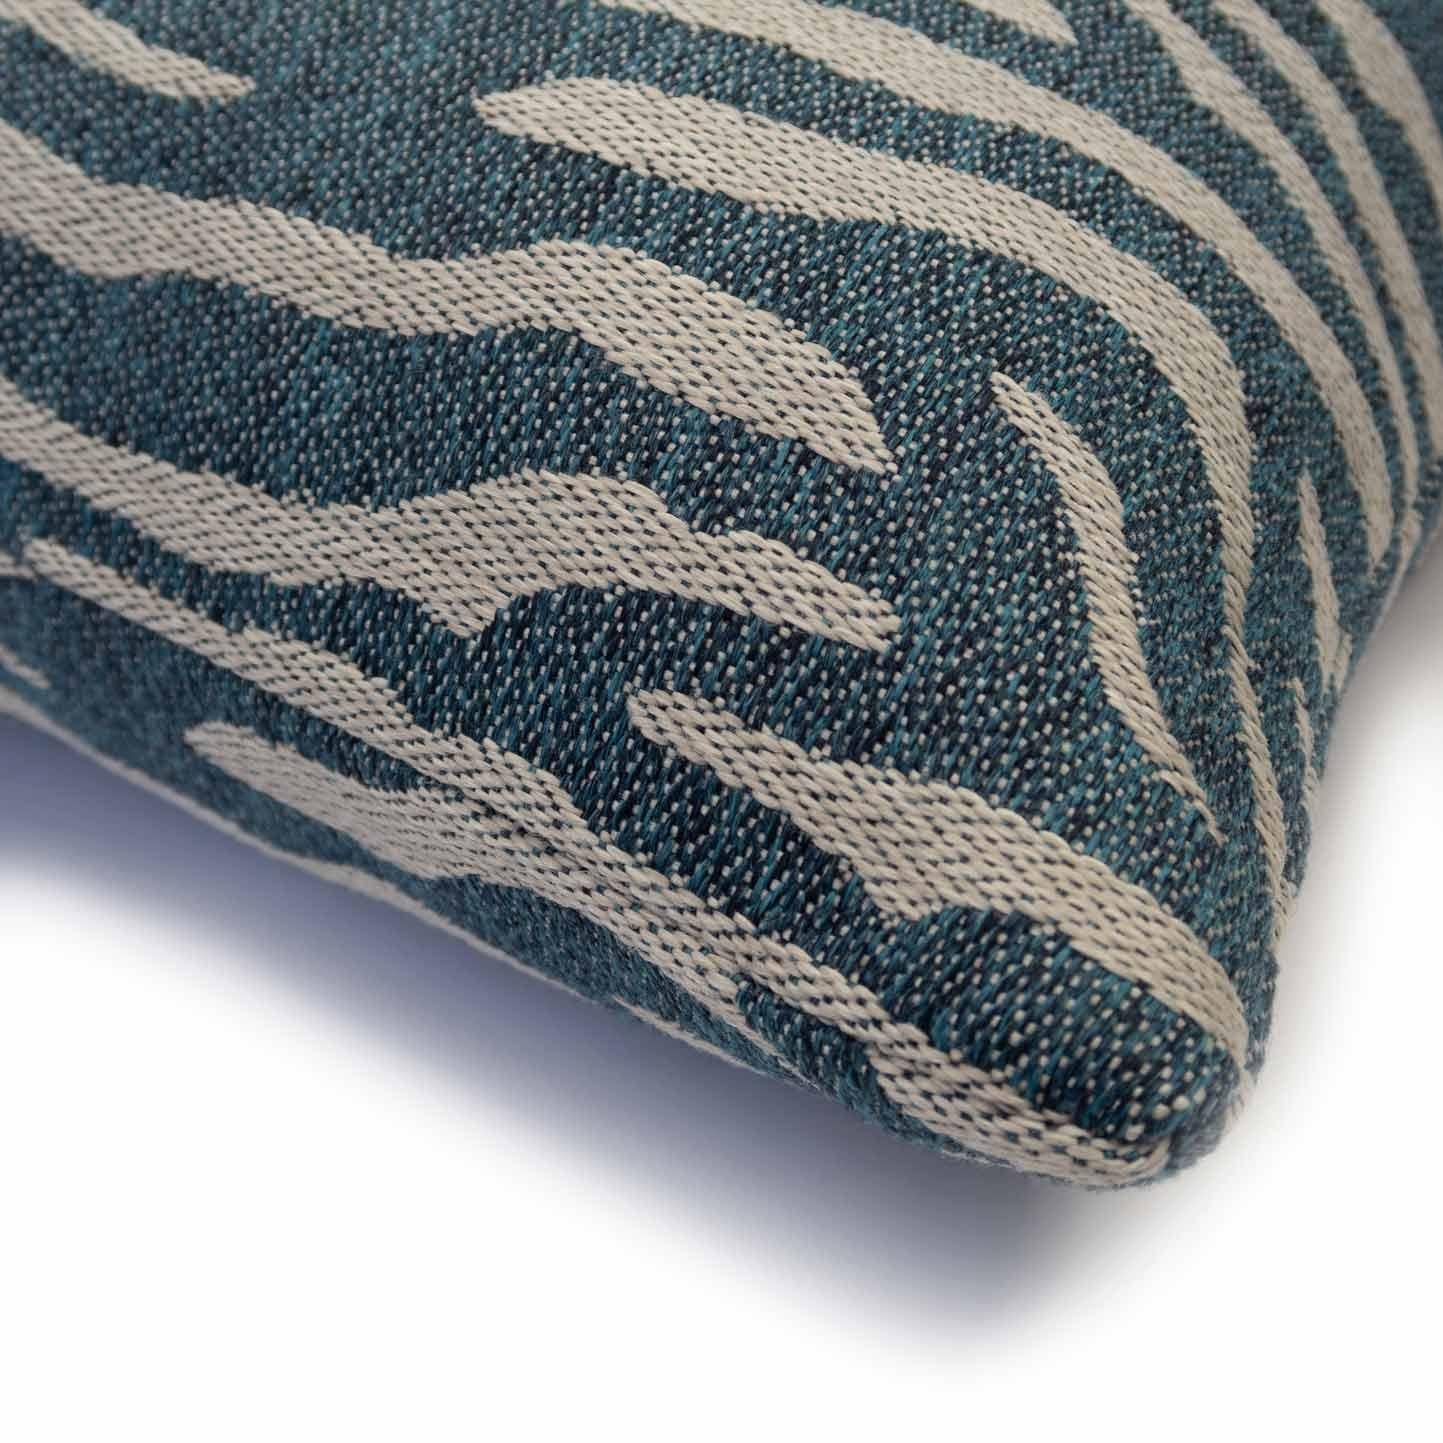 Hand-Crafted Modern Textured Patterned Throw Pillow Blue 